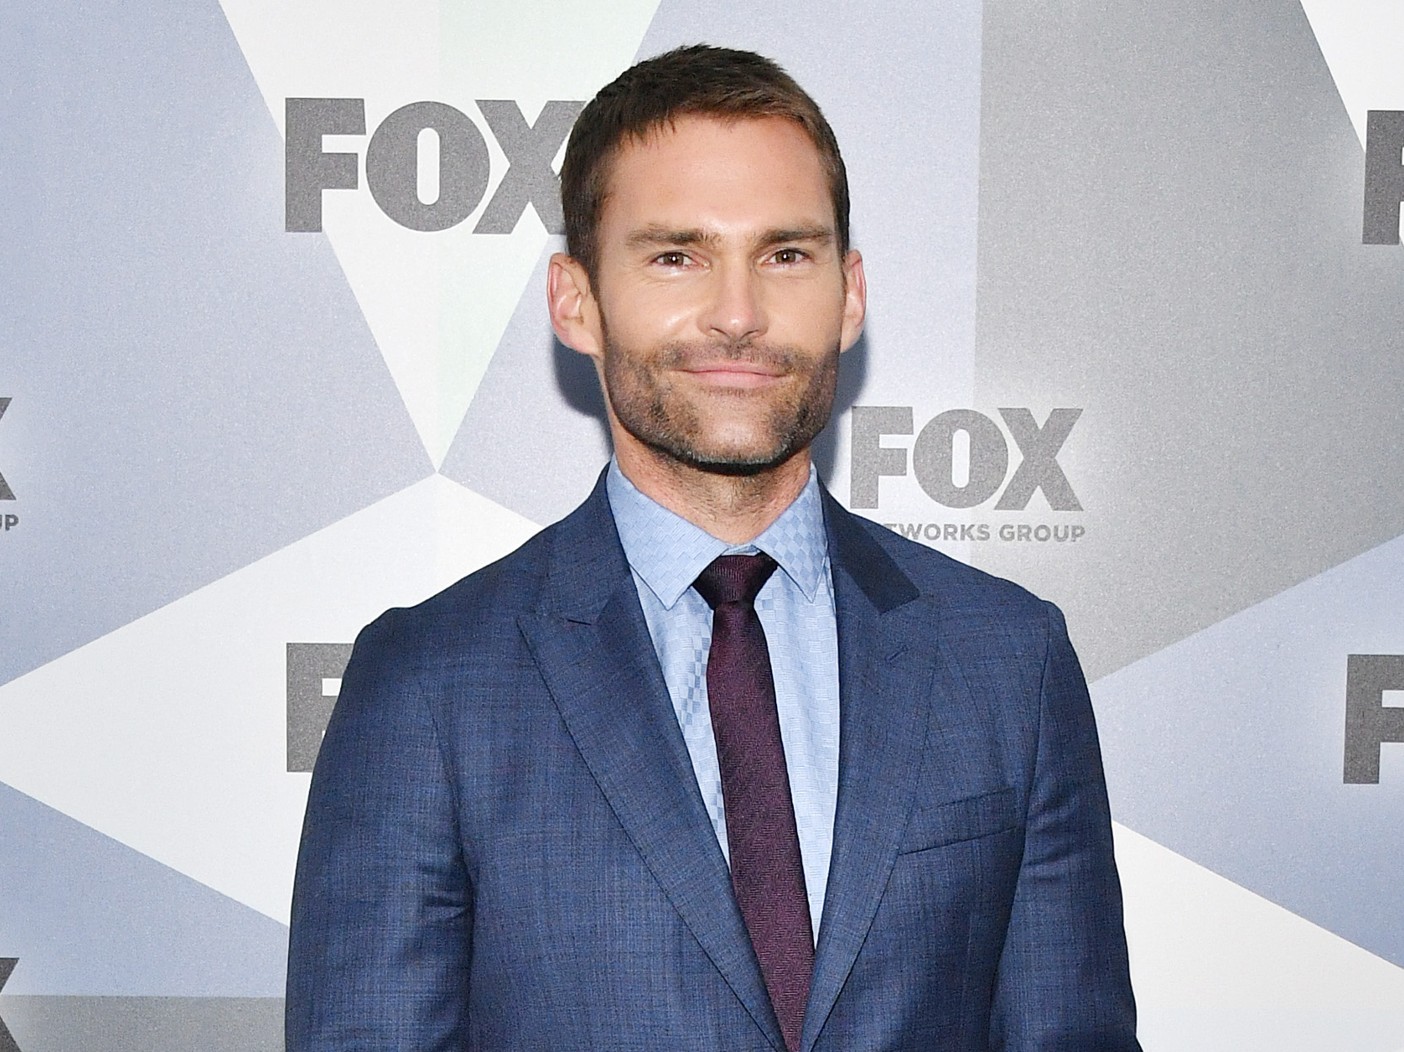 What Happened To Seann William Scott? Why He’s Rarely In Movies Anymore